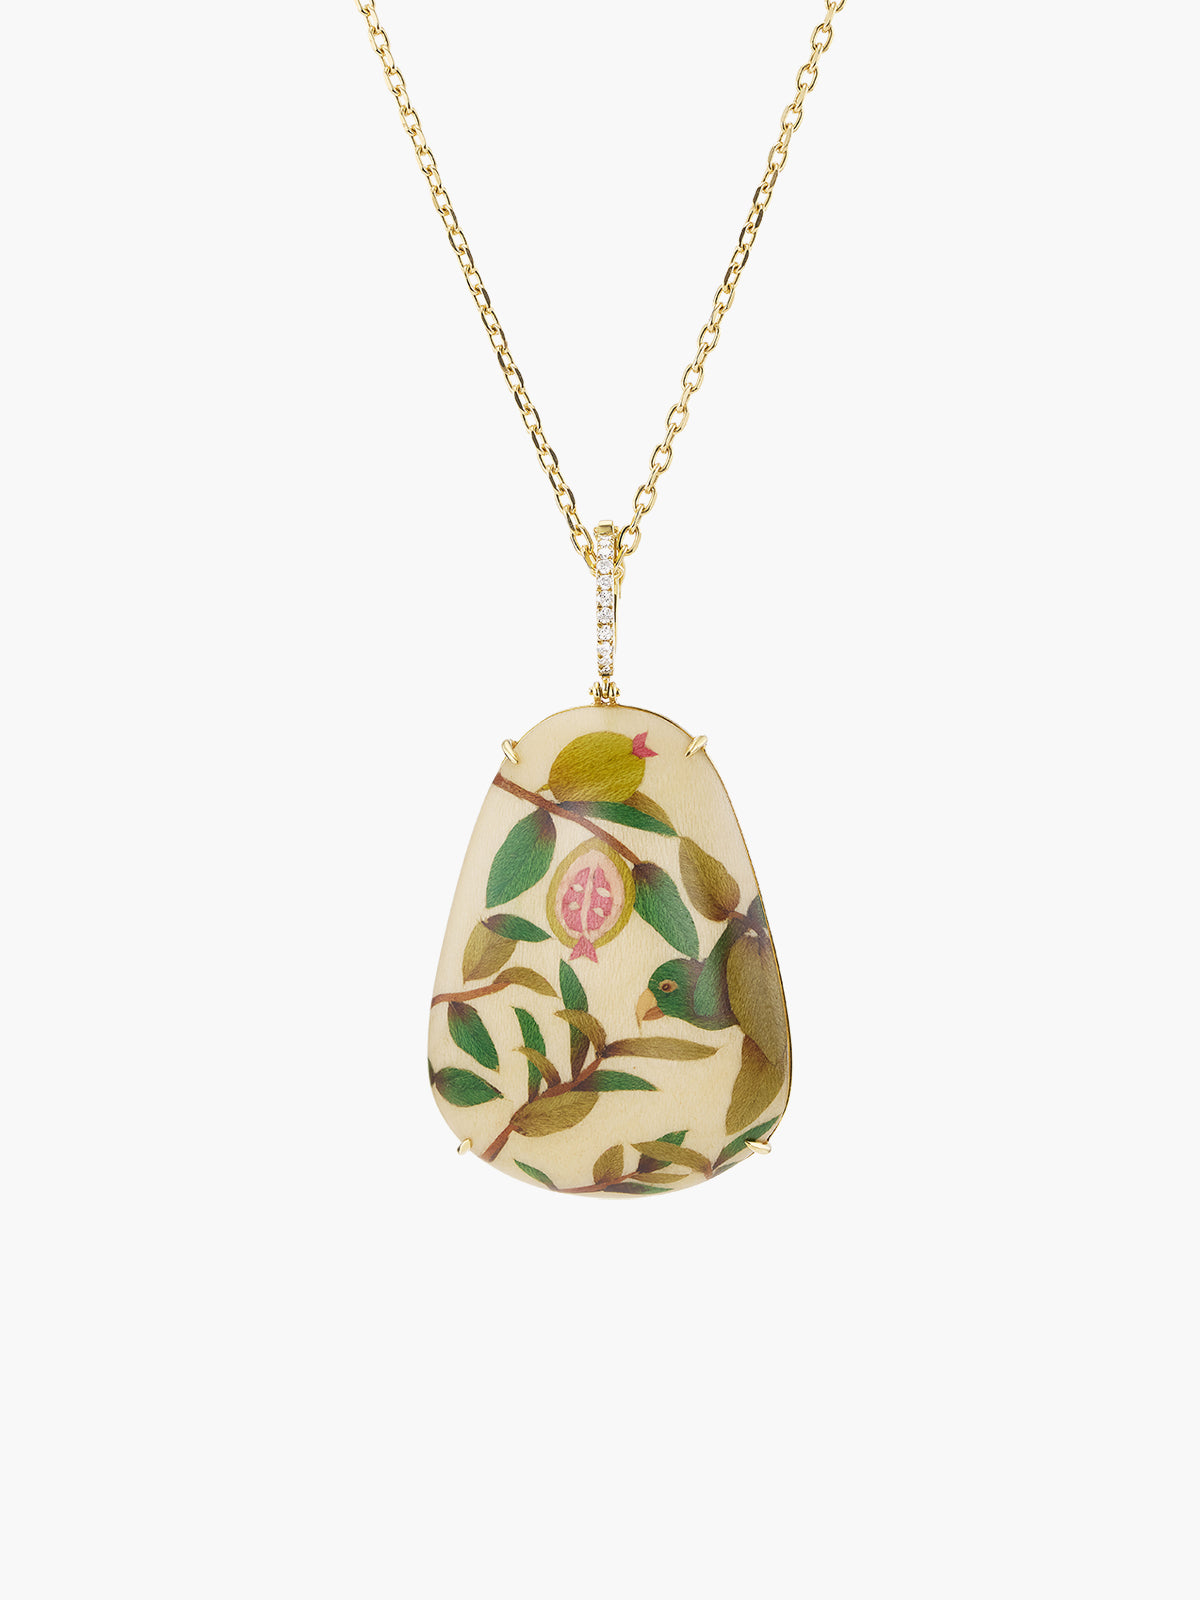 Marquetry Necklace | Guava and Parrot on Cream Marquetry Necklace | Guava and Parrot on Cream